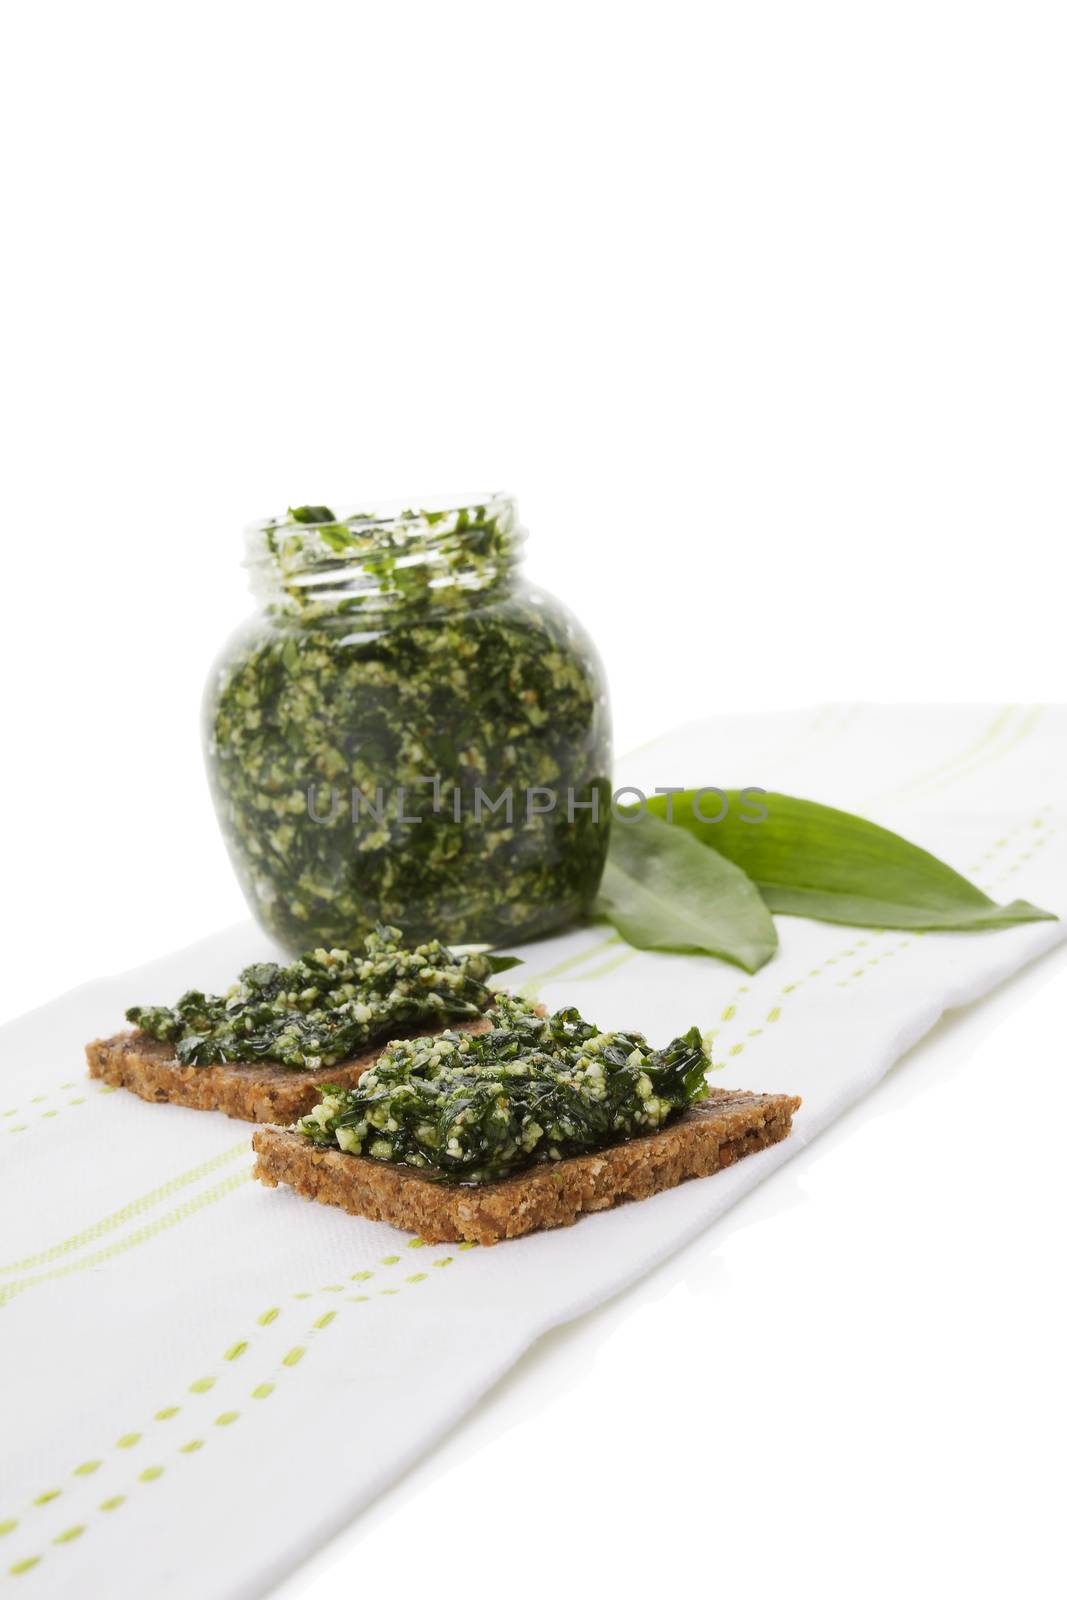 Culinary healthy eating, spring detox. Garlic pesto in glass jar with fresh wild garlic leaves isolated on white background. 